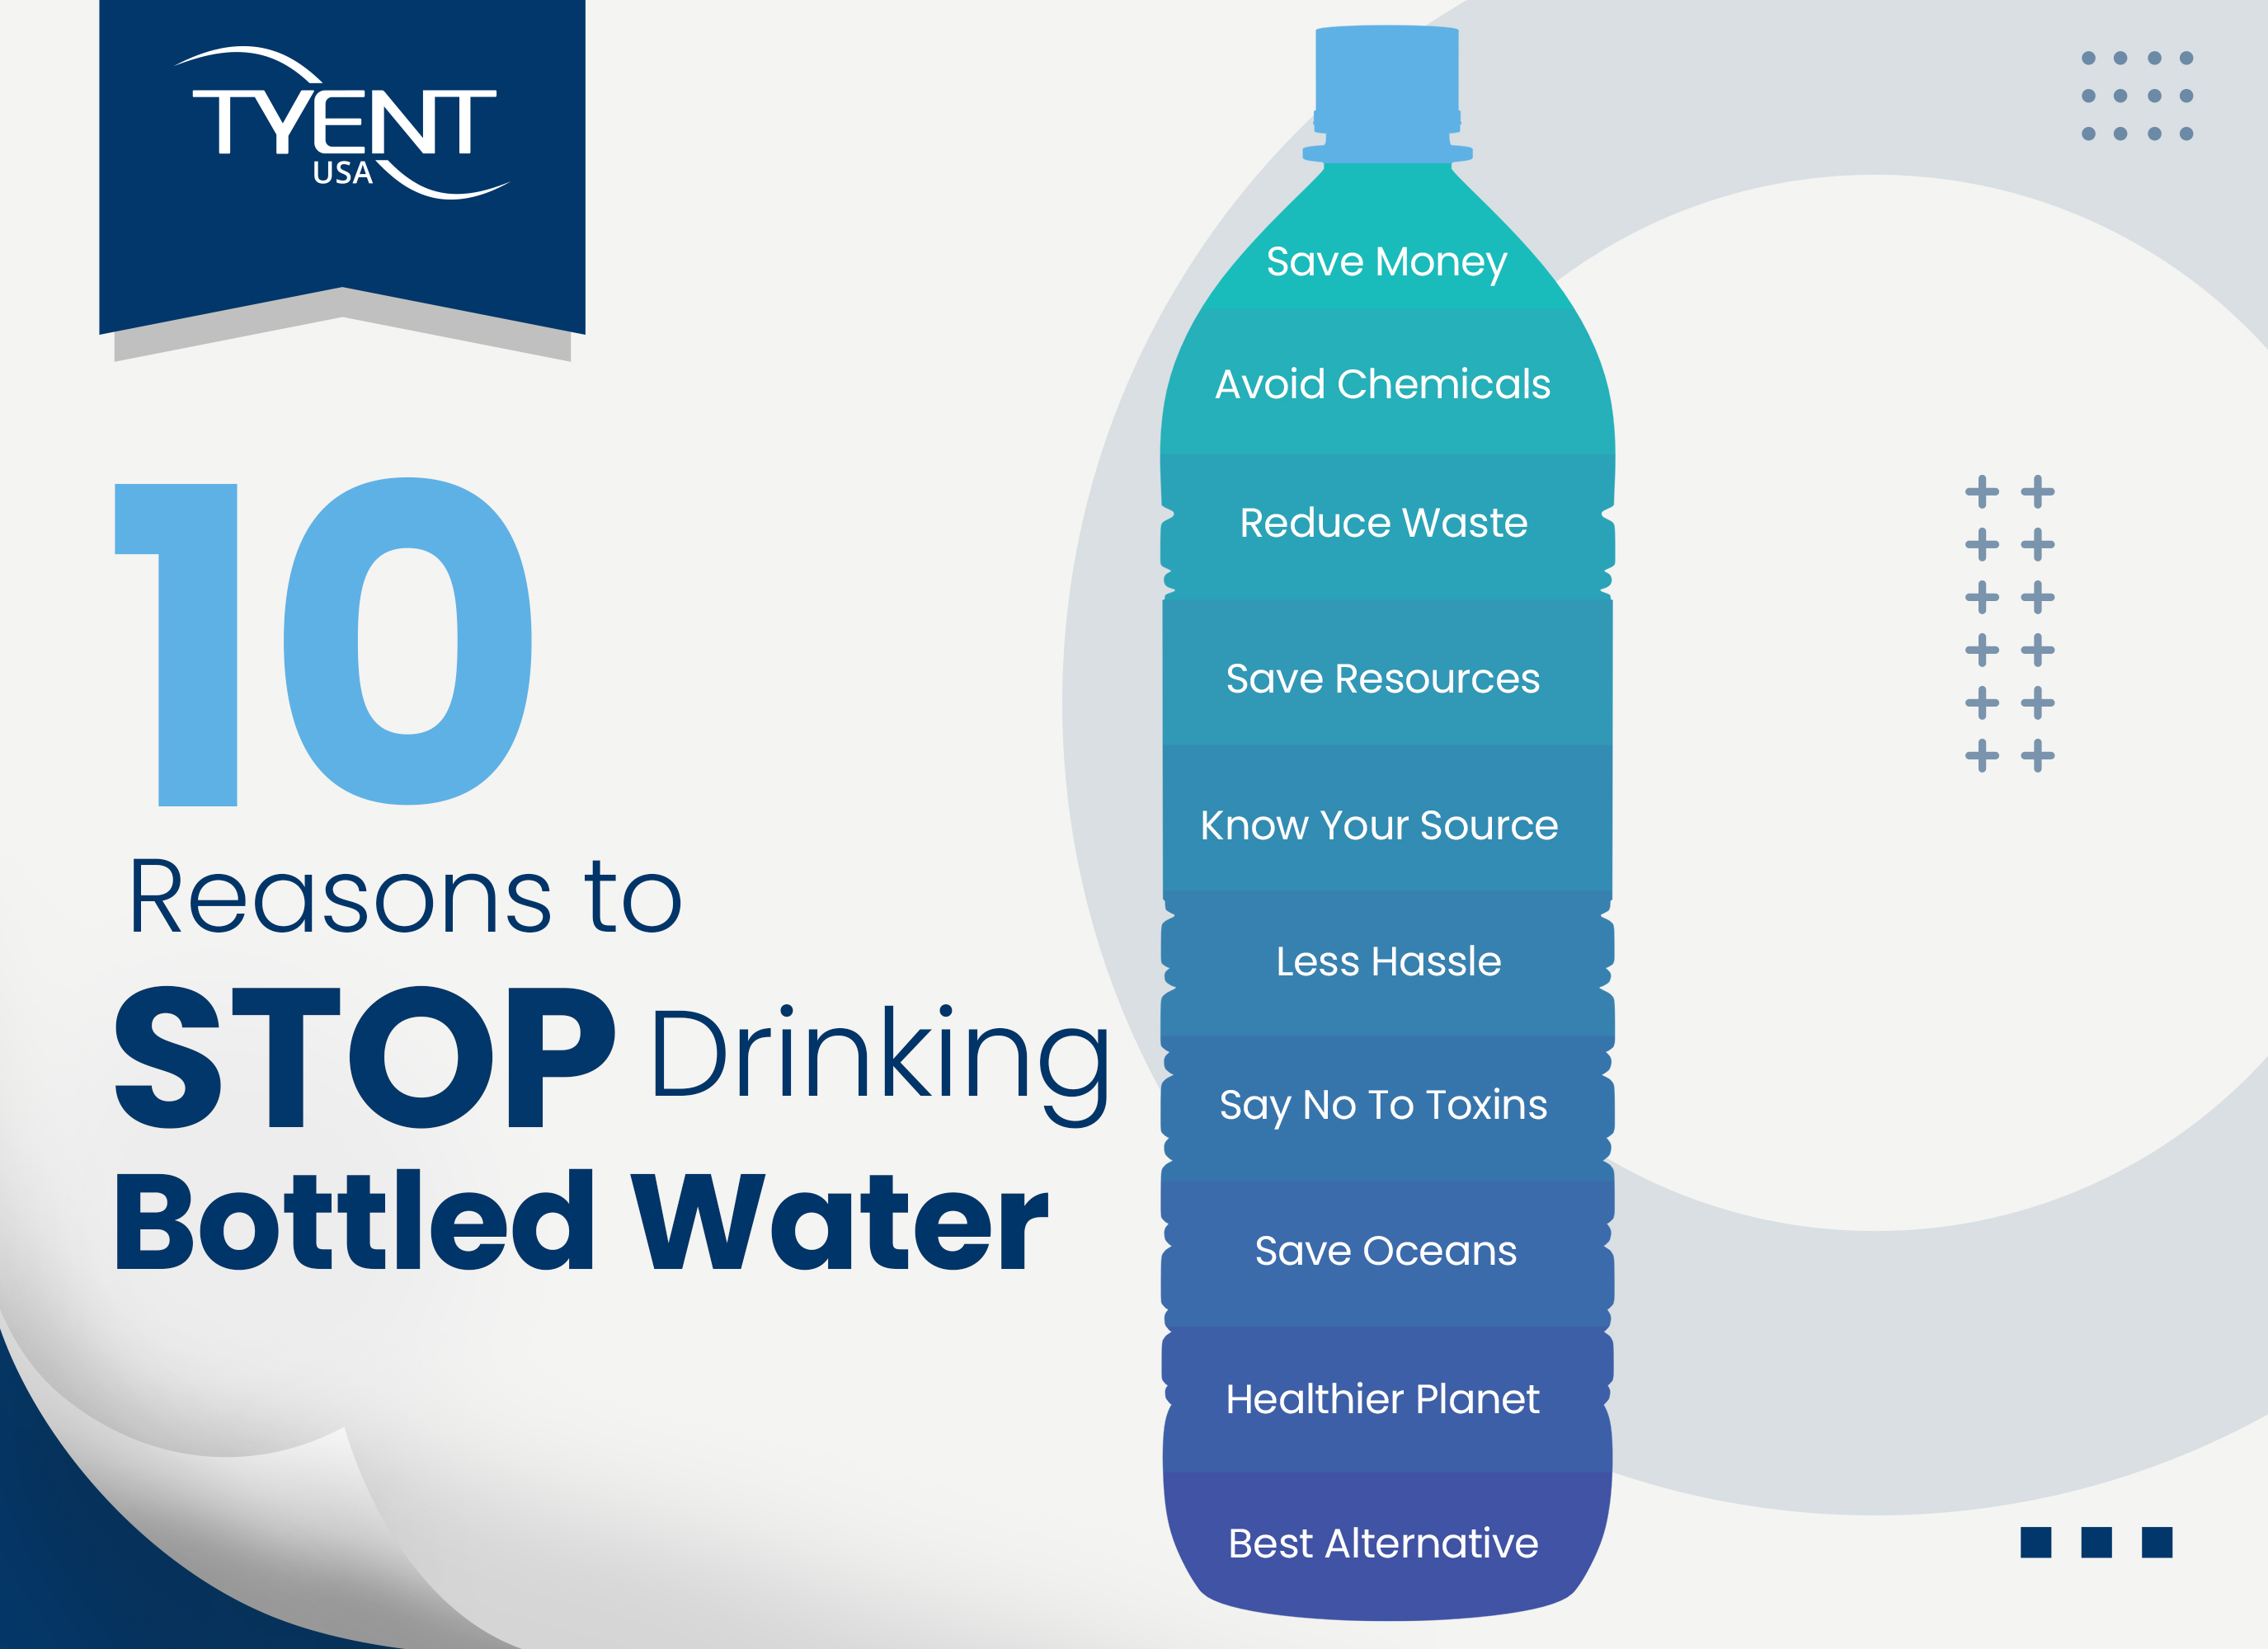 10 Reasons to Stop Drinking Bottled Water